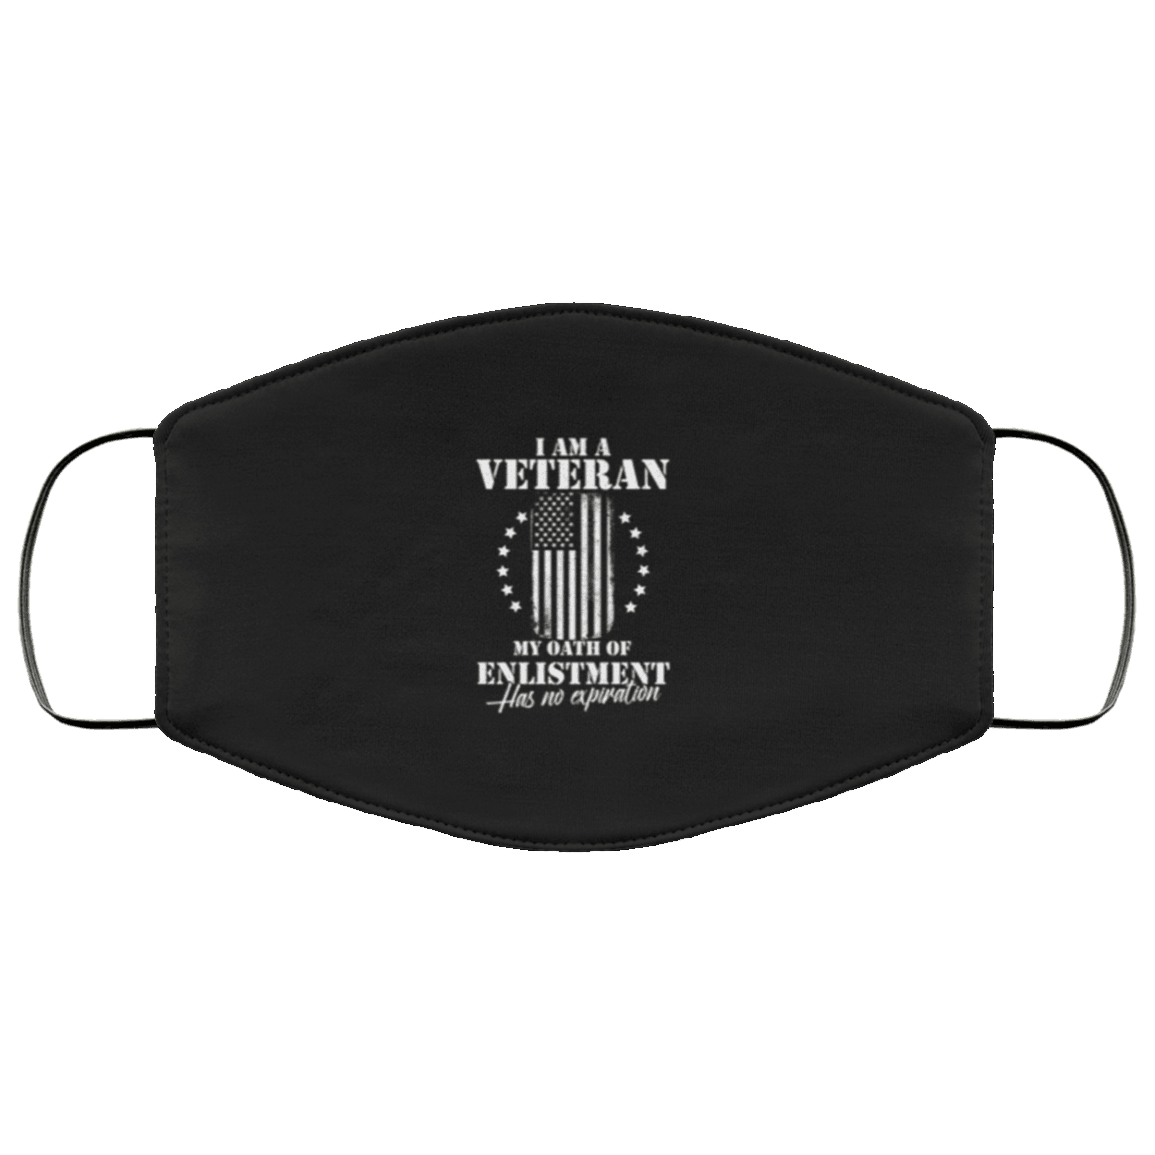 Designs by MyUtopia Shout Out:Veteran Oath of Enlistment Has No Expiration Adult Fabric Face Mask with Elastic Ear Loops,3 Layer Fabric Face Mask / Black / Adult,Fabric Face Mask